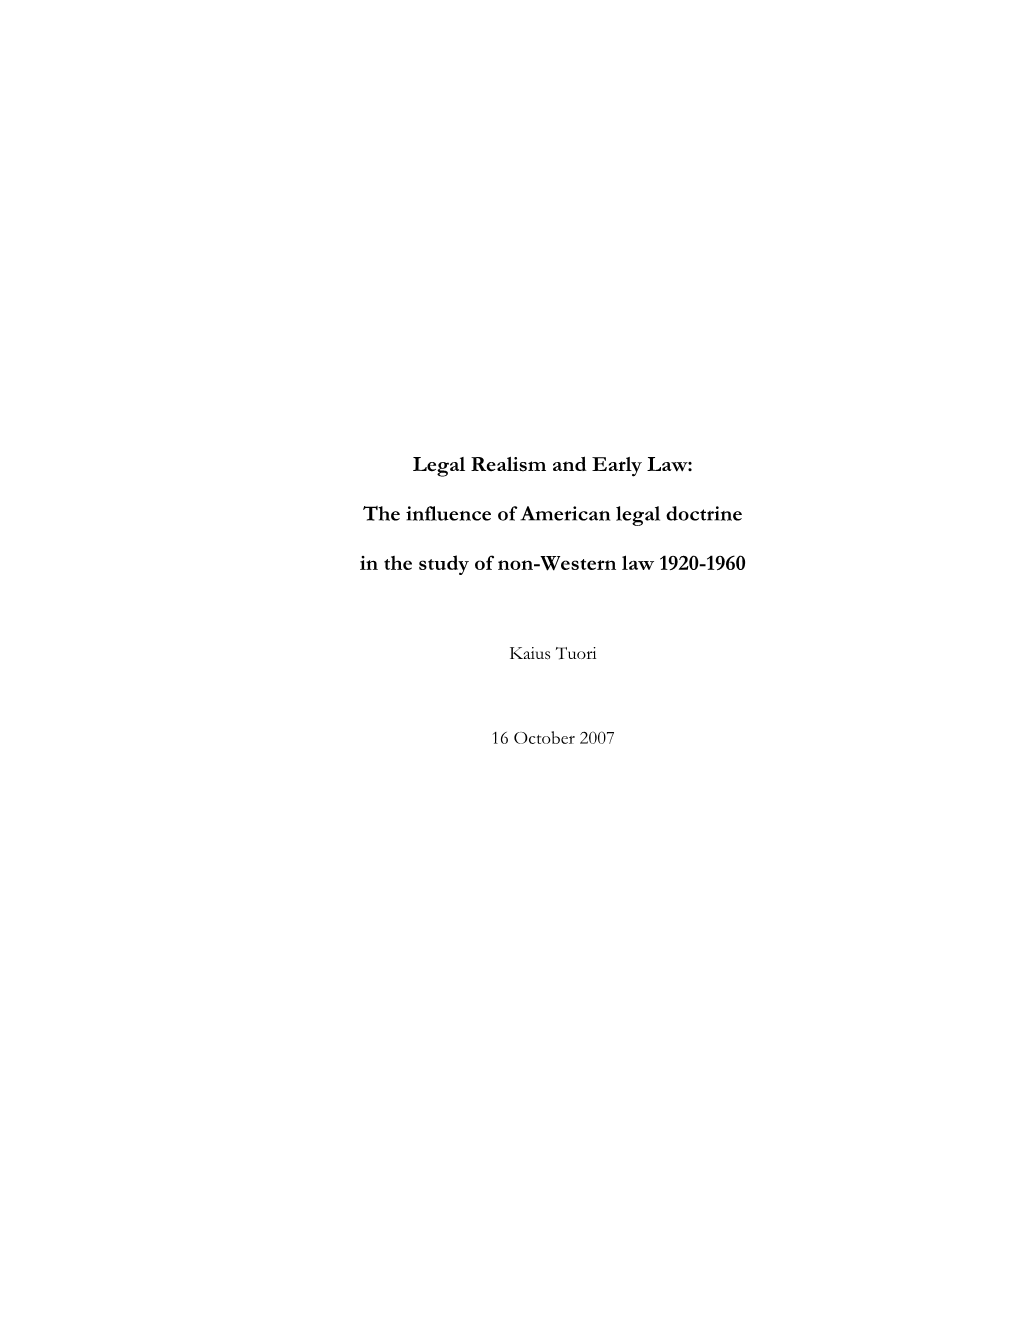 Legal Realism and Early Law: the Influence of American Legal Doctrine